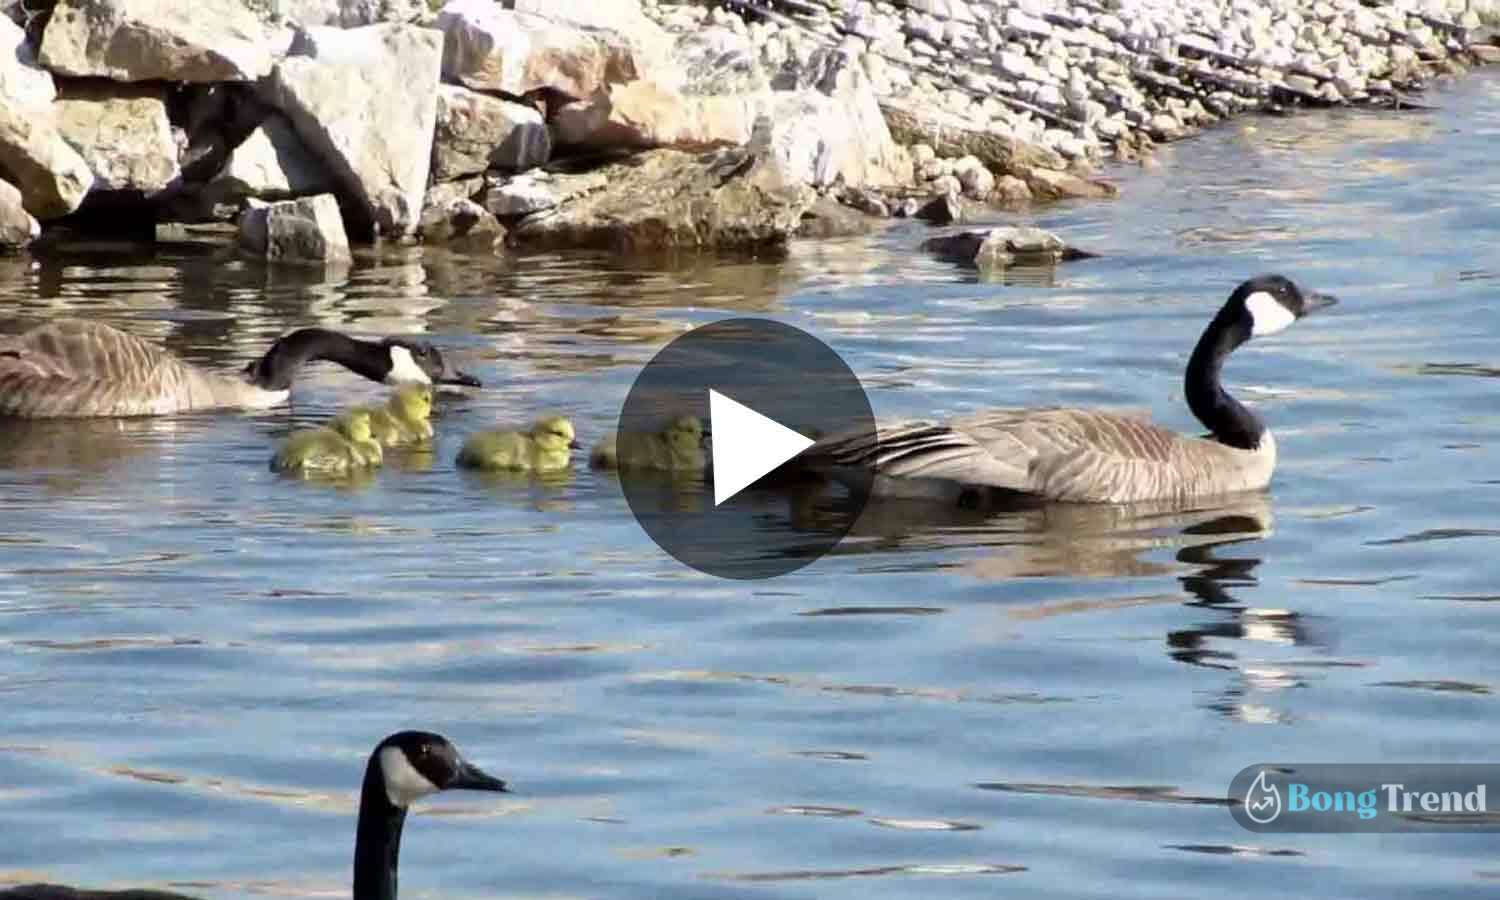 Viral Video of Mother duck playing hide and seek